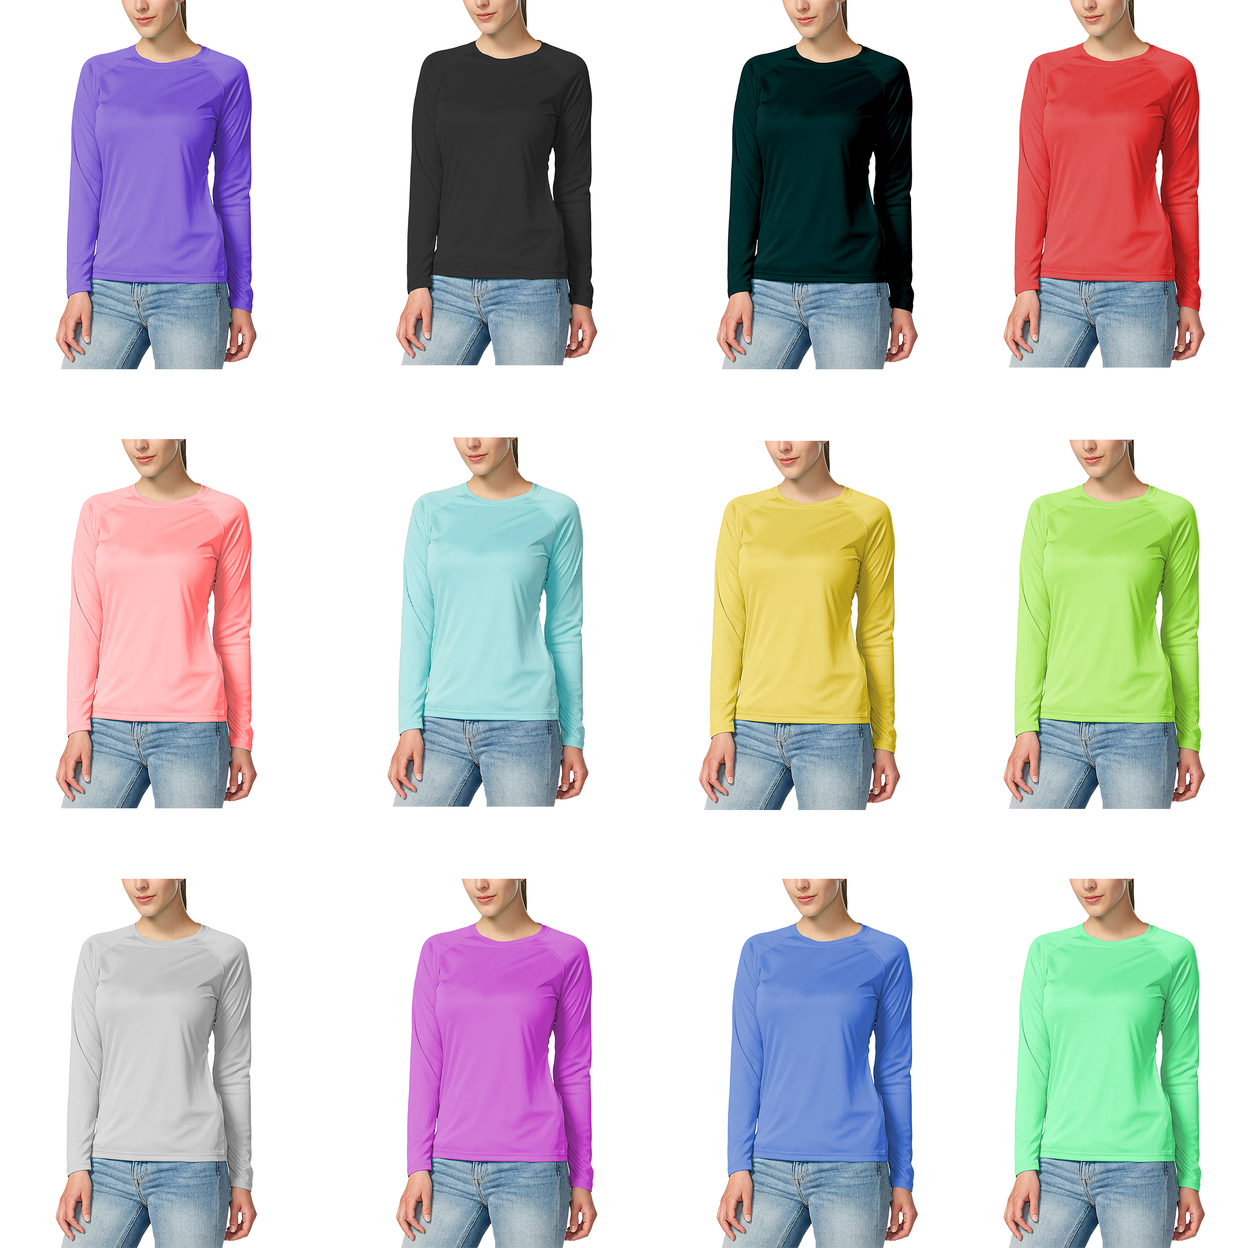 3-Pack: Women's Dri-Fit Moisture-Wicking Breathable Long Sleeve T-Shirt - Large